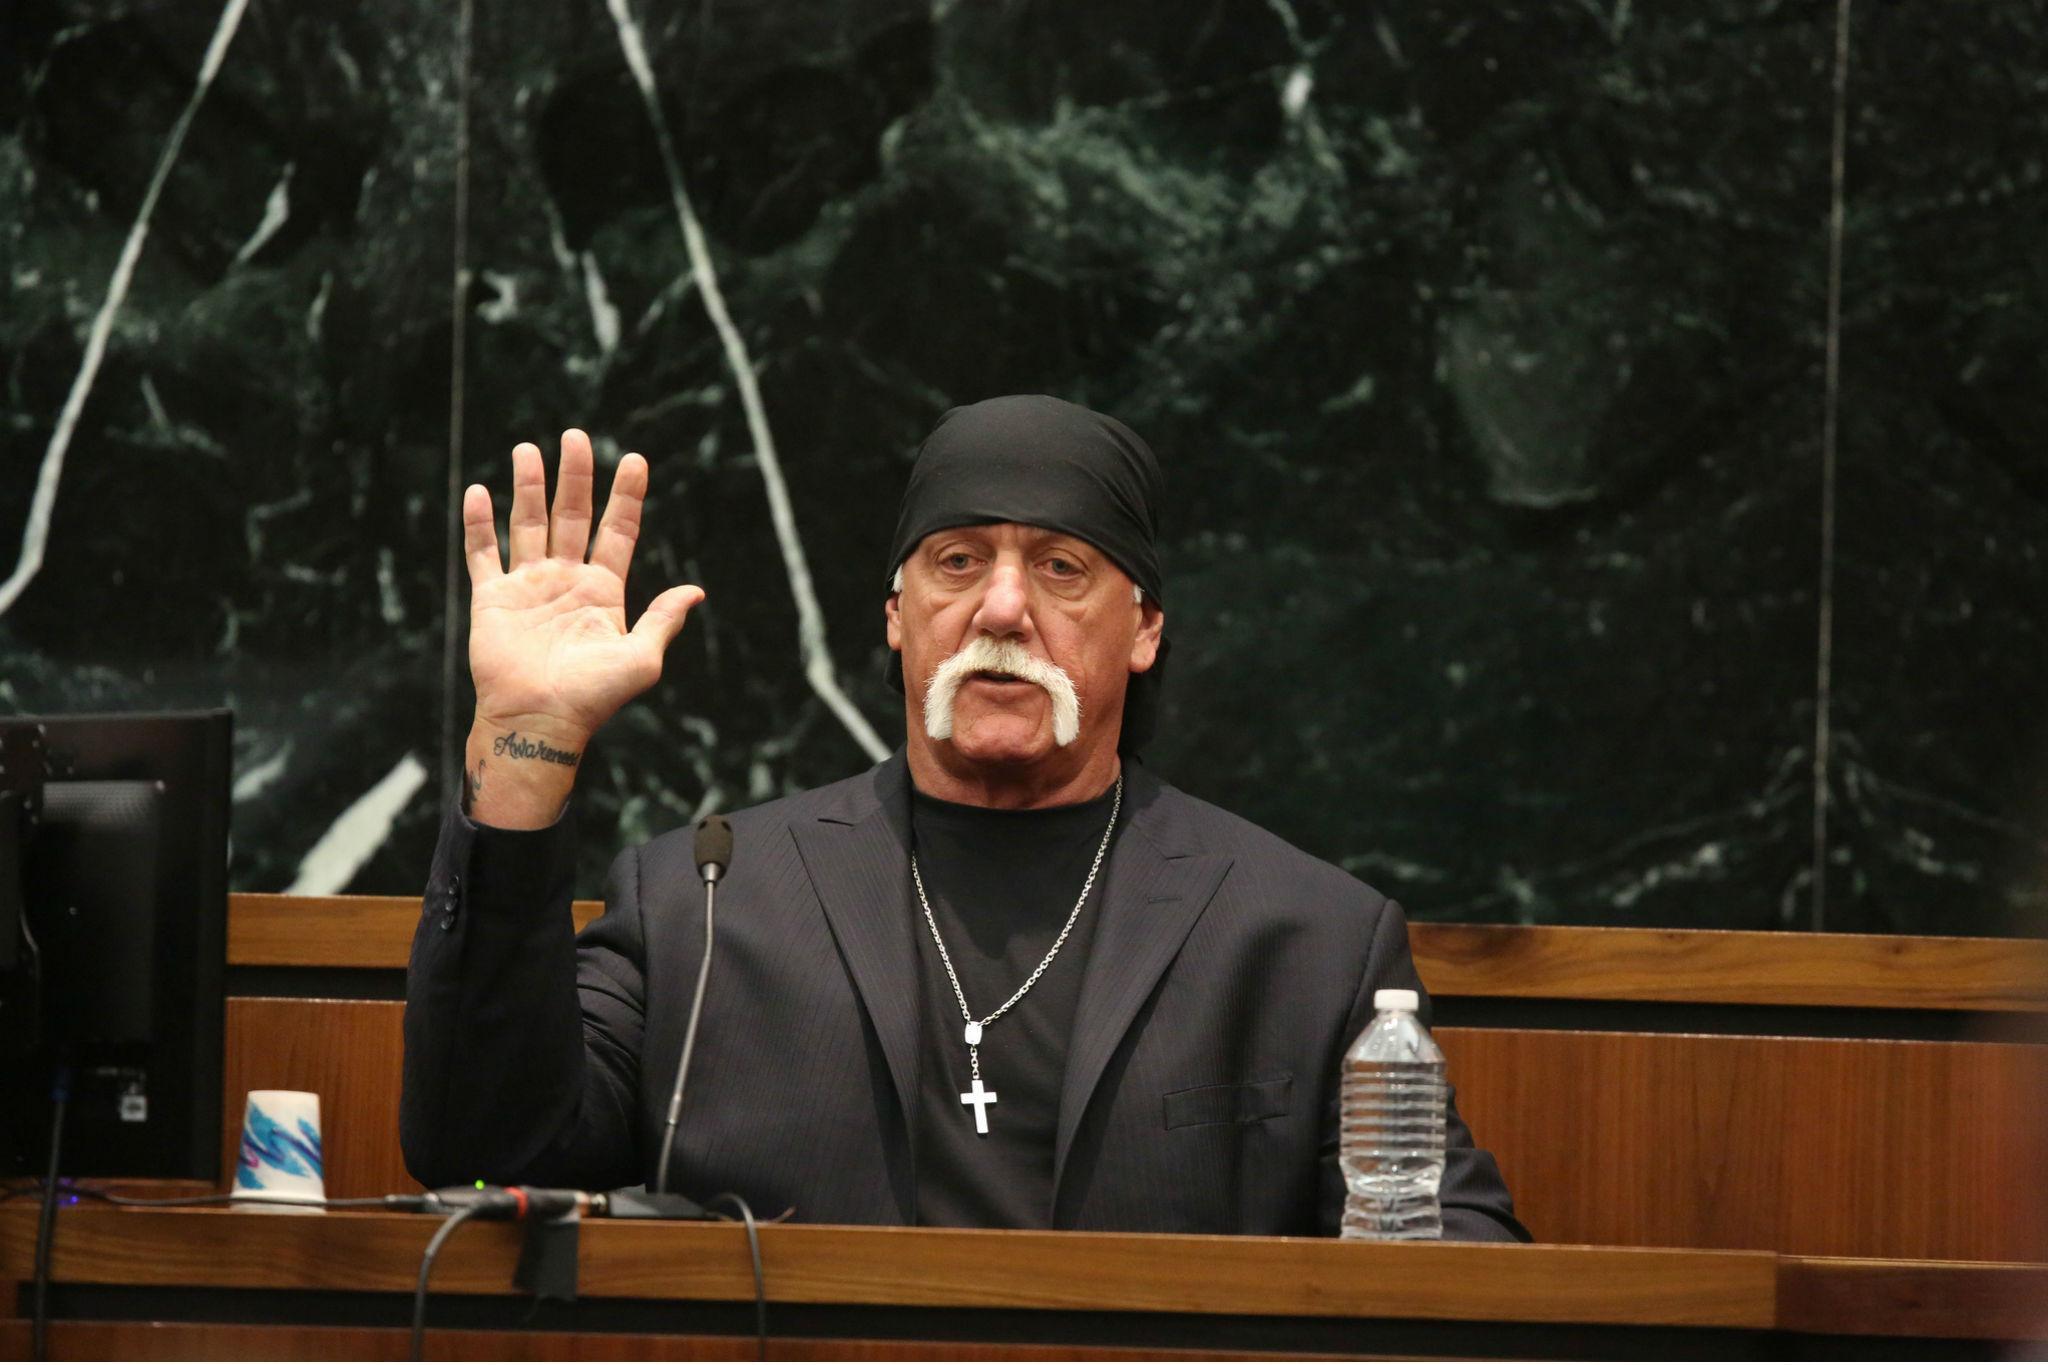 Wrestler Hulk Hogan’s successful action against Gawker Media over the publication of a sex tape is the subject of a new documentary